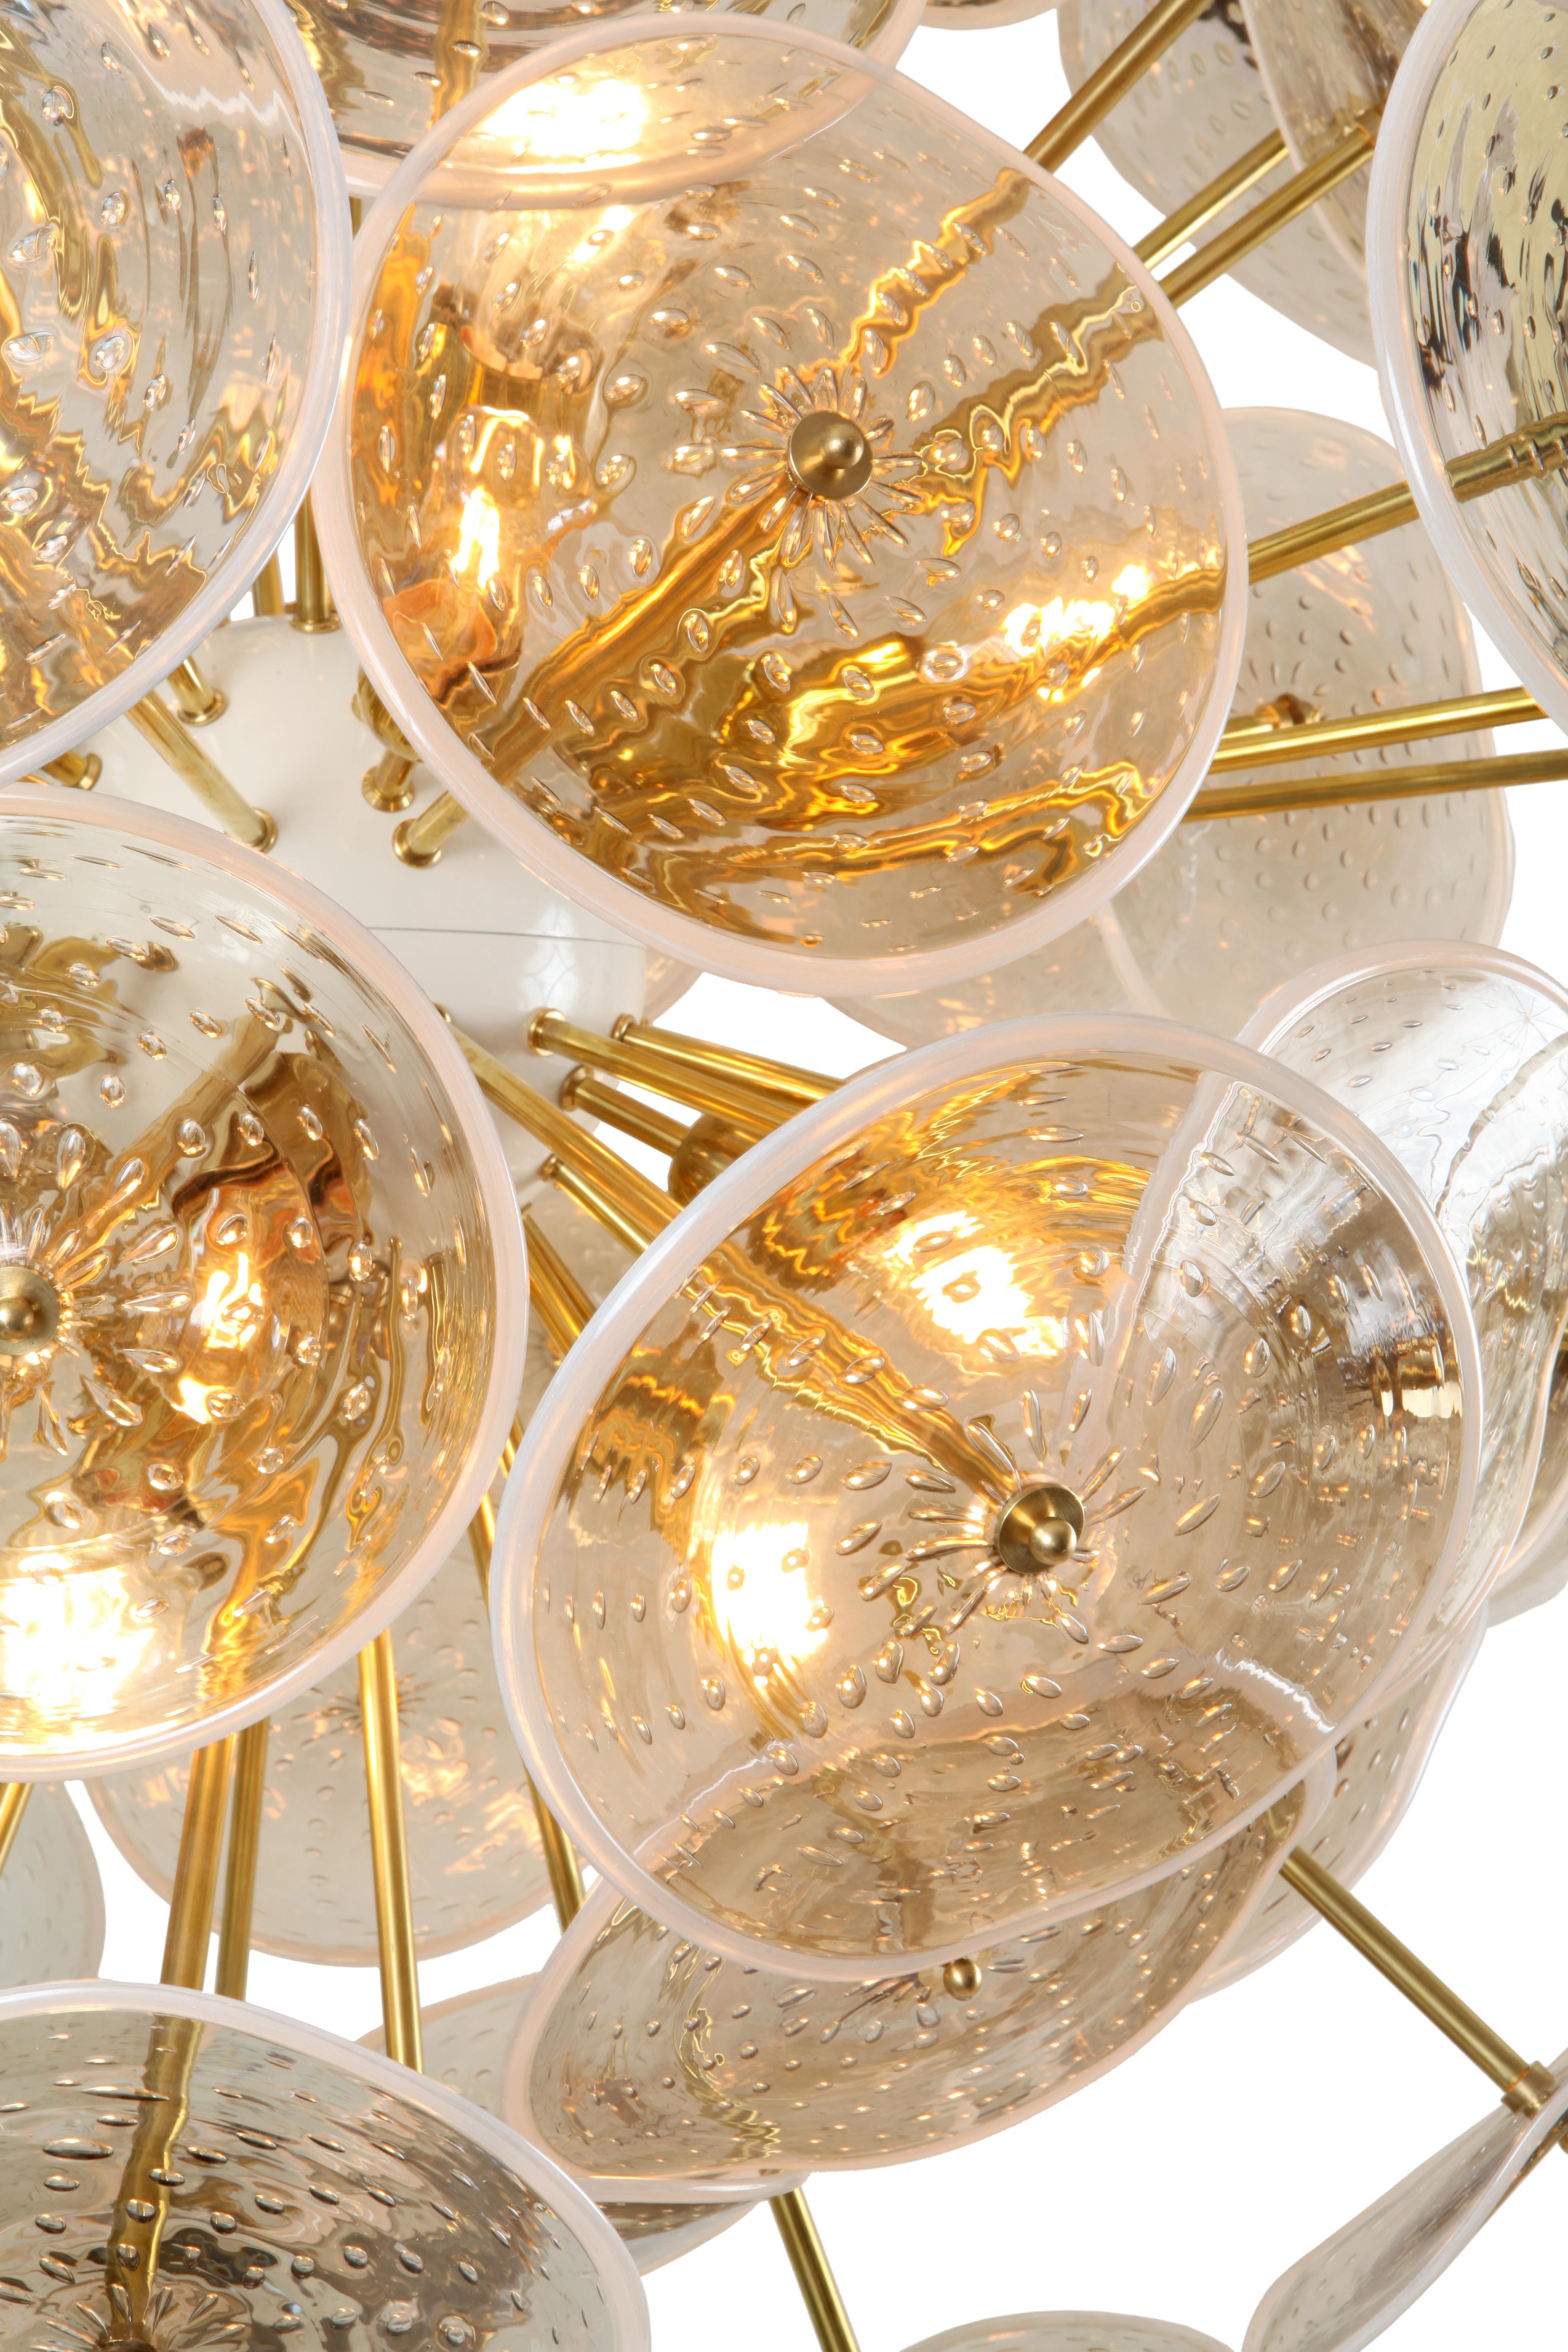 This Sputnik chandelier is made to order with a central white powder coated brass orb, natural brass rods at two lengths, a brass drop rod and white powder coated brass canopy. The glass discs are hand blown Murano glass with a 